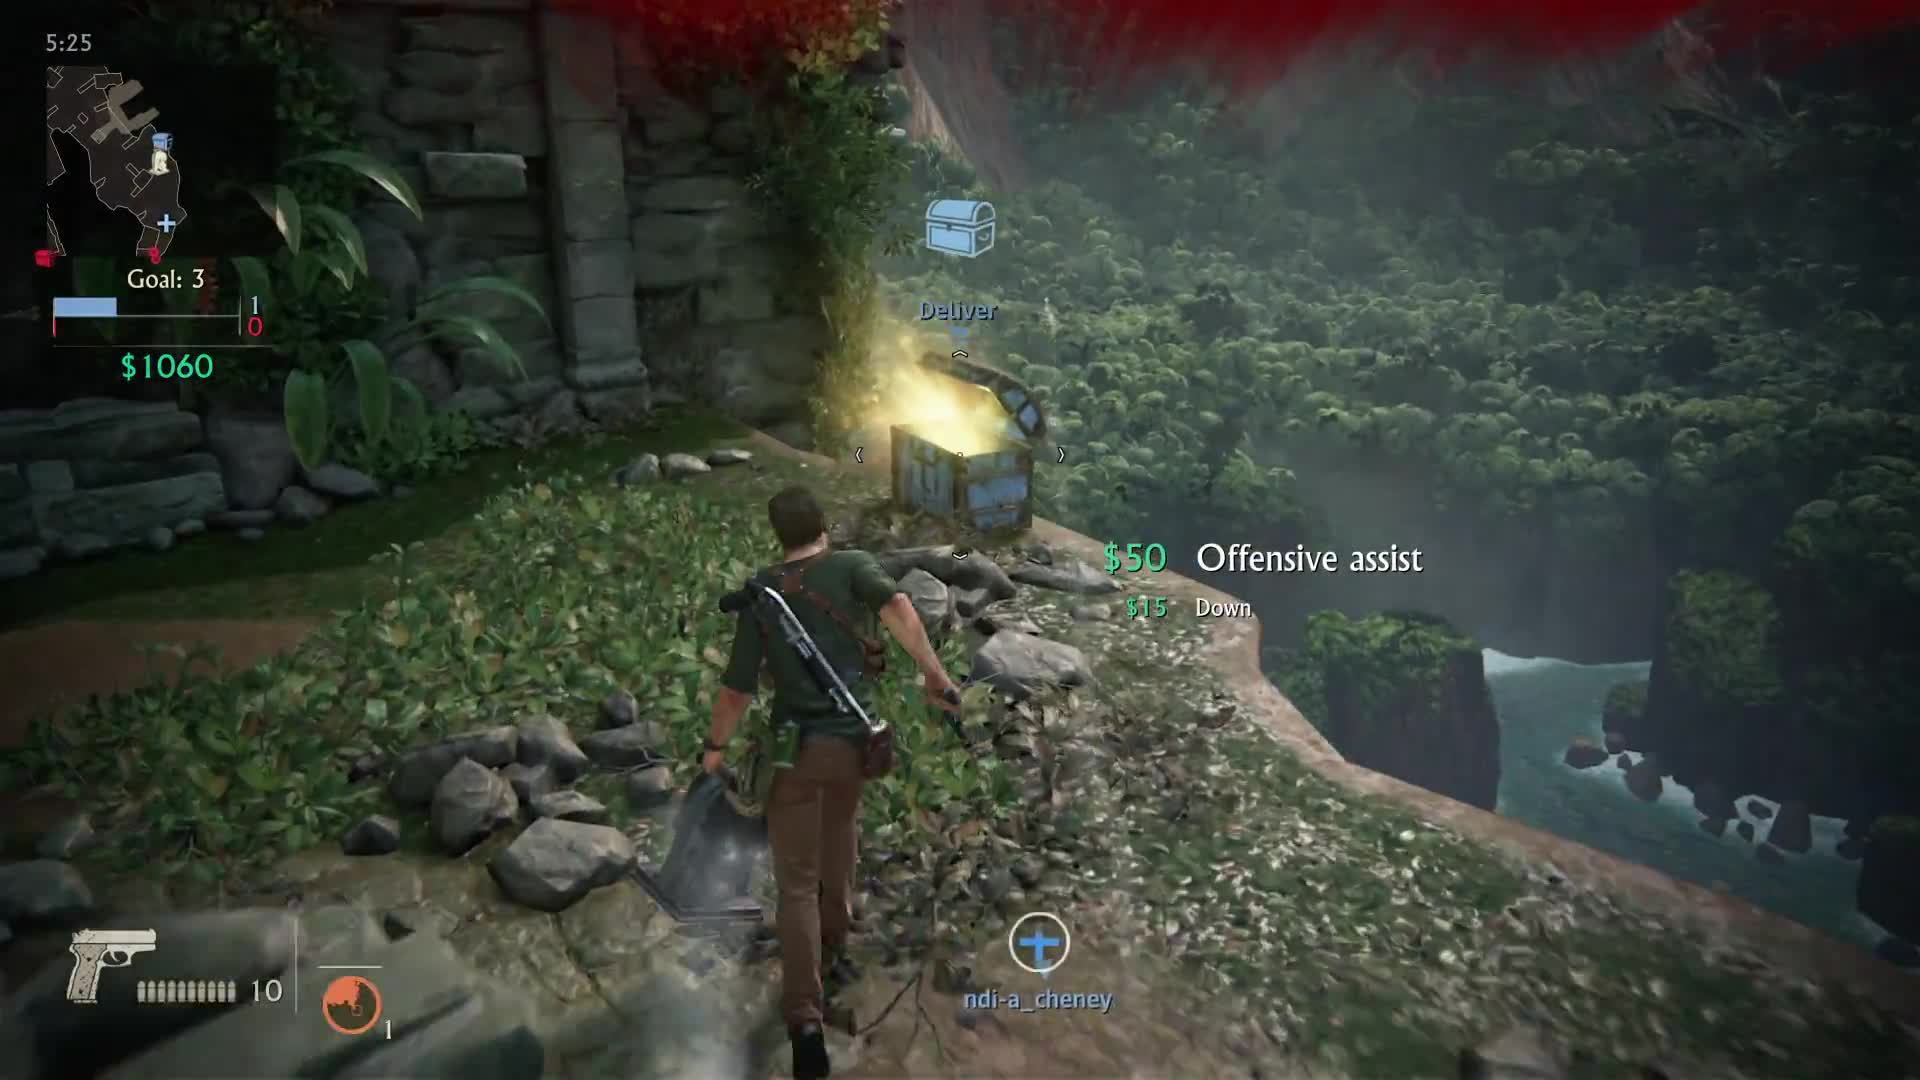 Uncharted 4: A Thief's End - Plunder mode